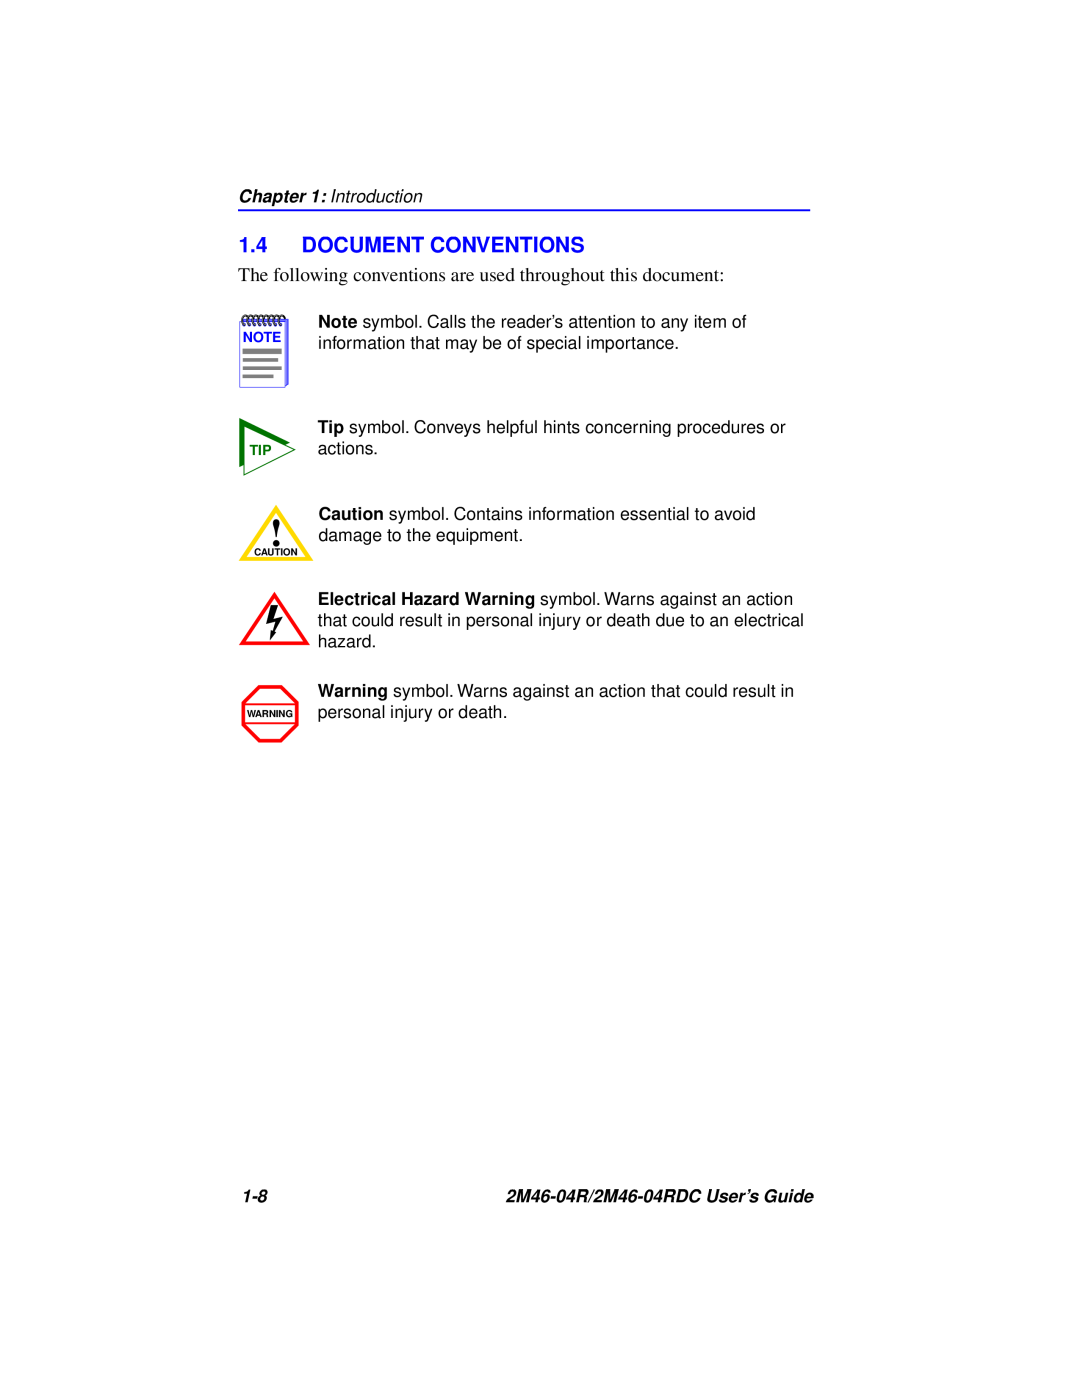 Cabletron Systems pmn Document Conventions, The following conventions are used throughout this document, Introduction 